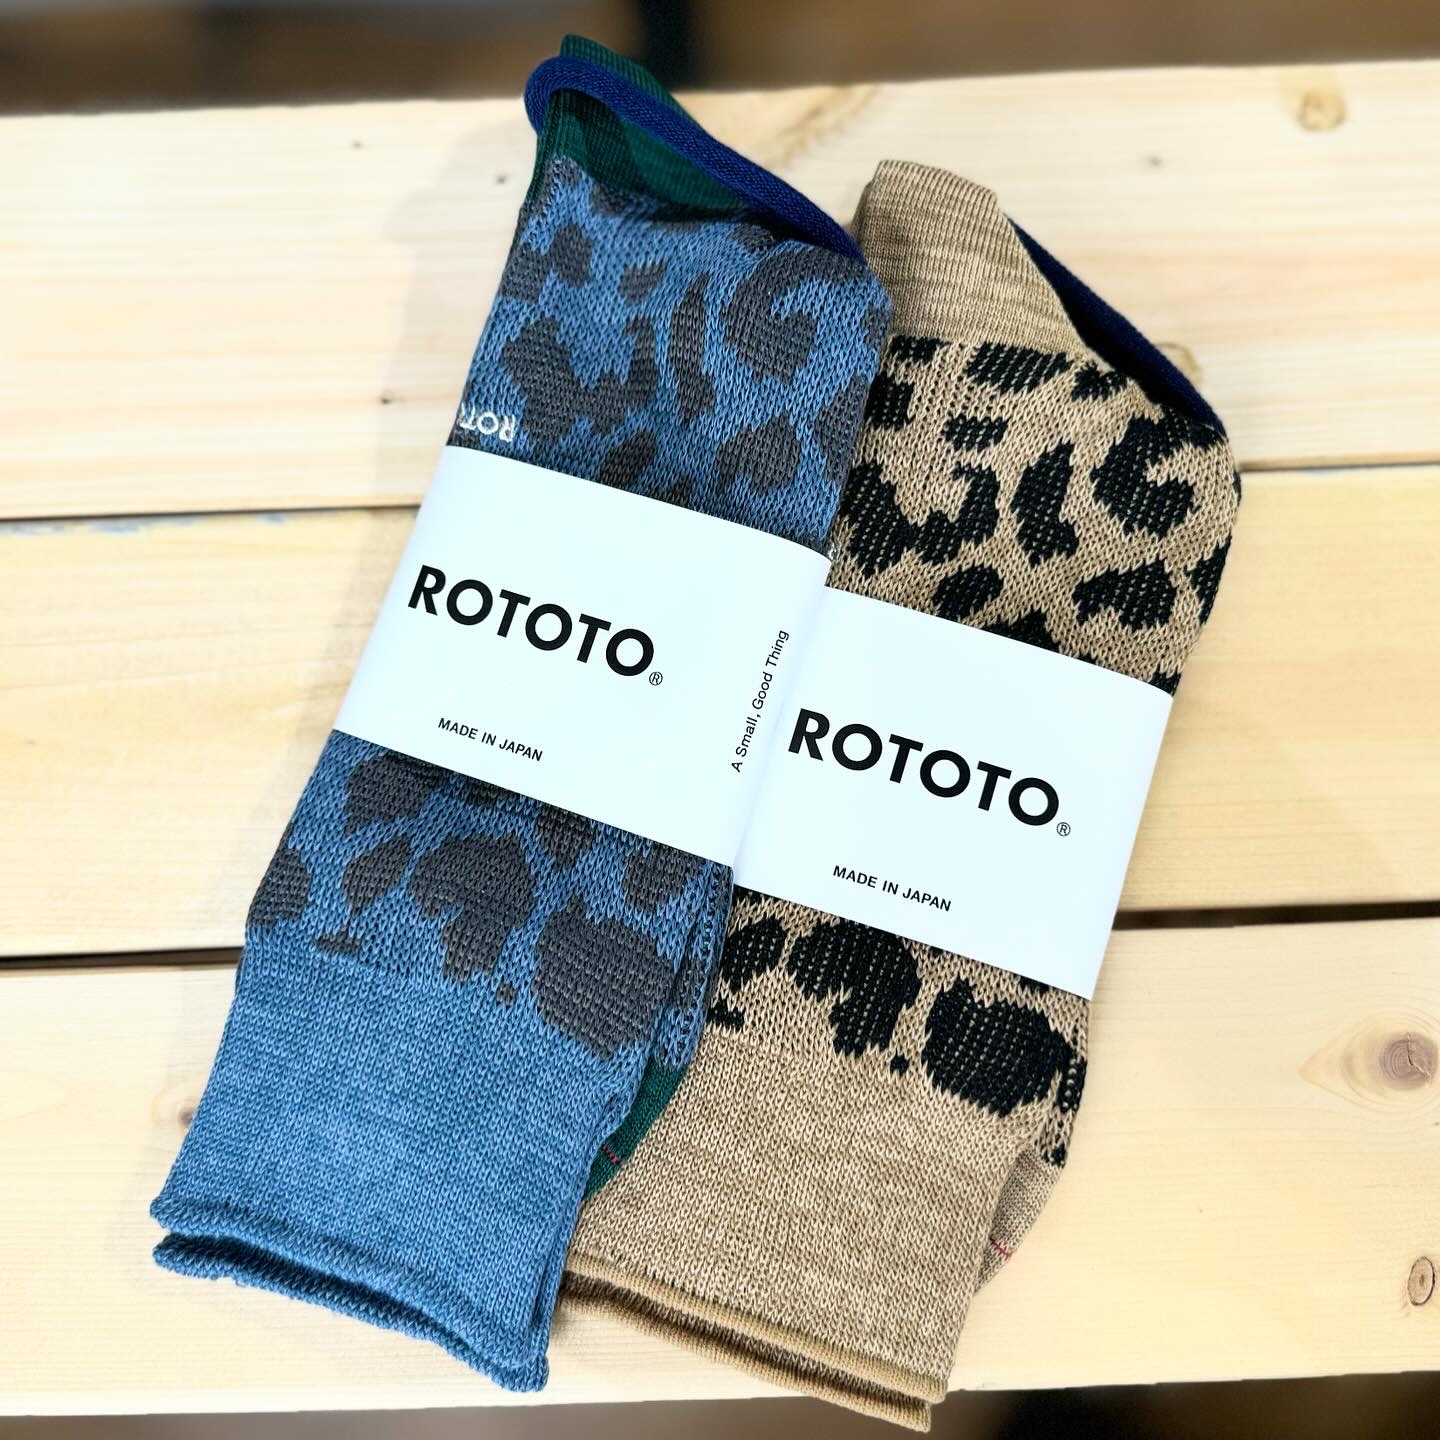 ROTOTO (ロトト） ORGANIC COTTON & RECYCLE POLYESTER CREW SOCKS "LEOPARD"